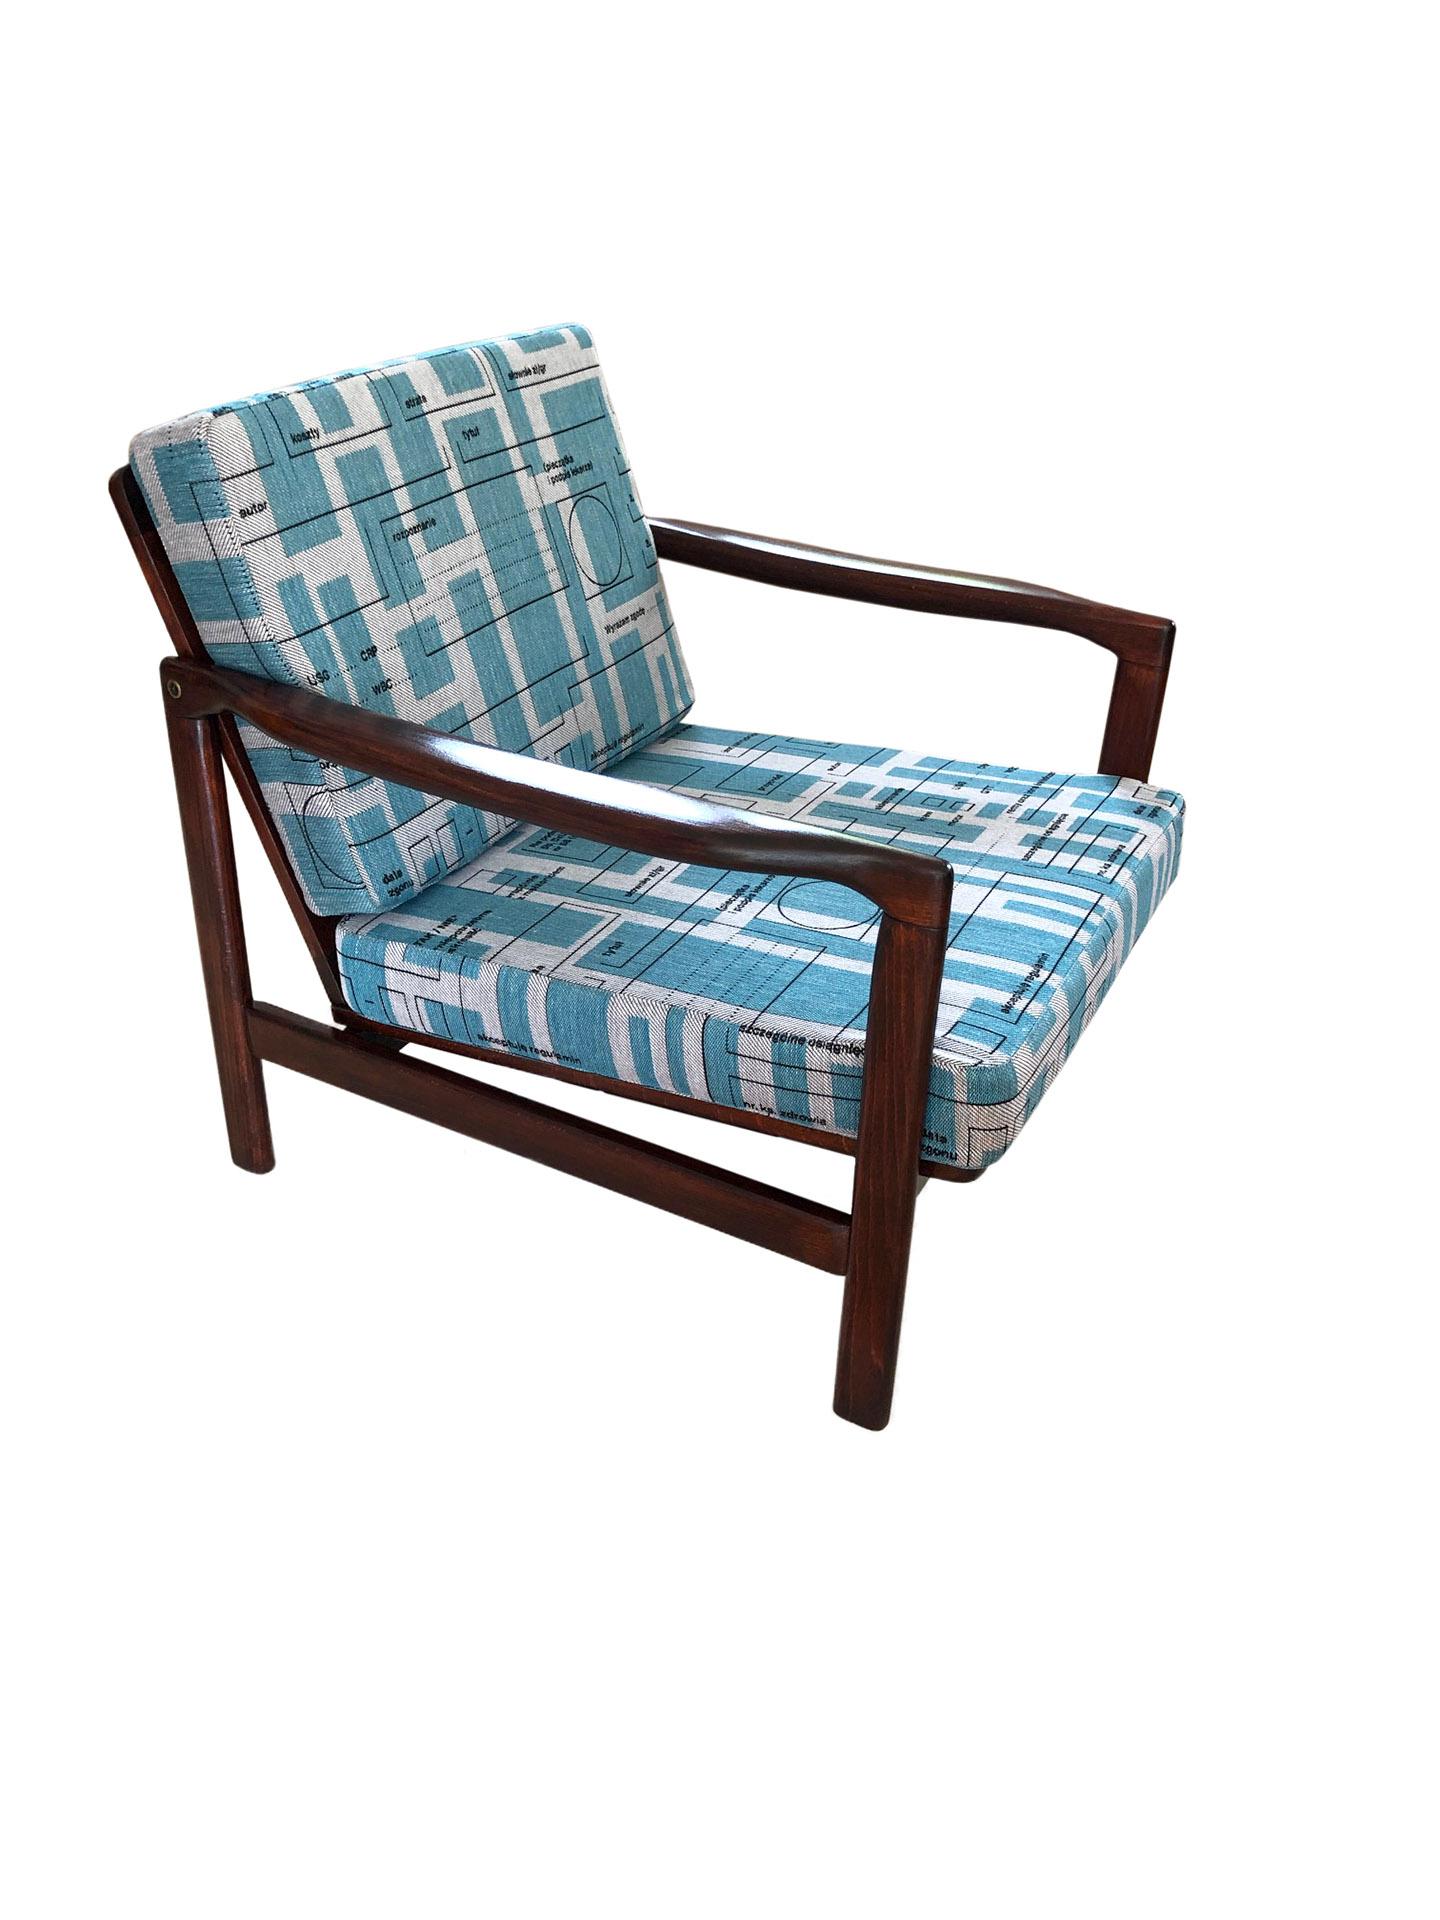 Mid-Century Modern Pair of Blue Jacquard Mid-Century Armchairs by Zenon Bączyk, 1960s For Sale